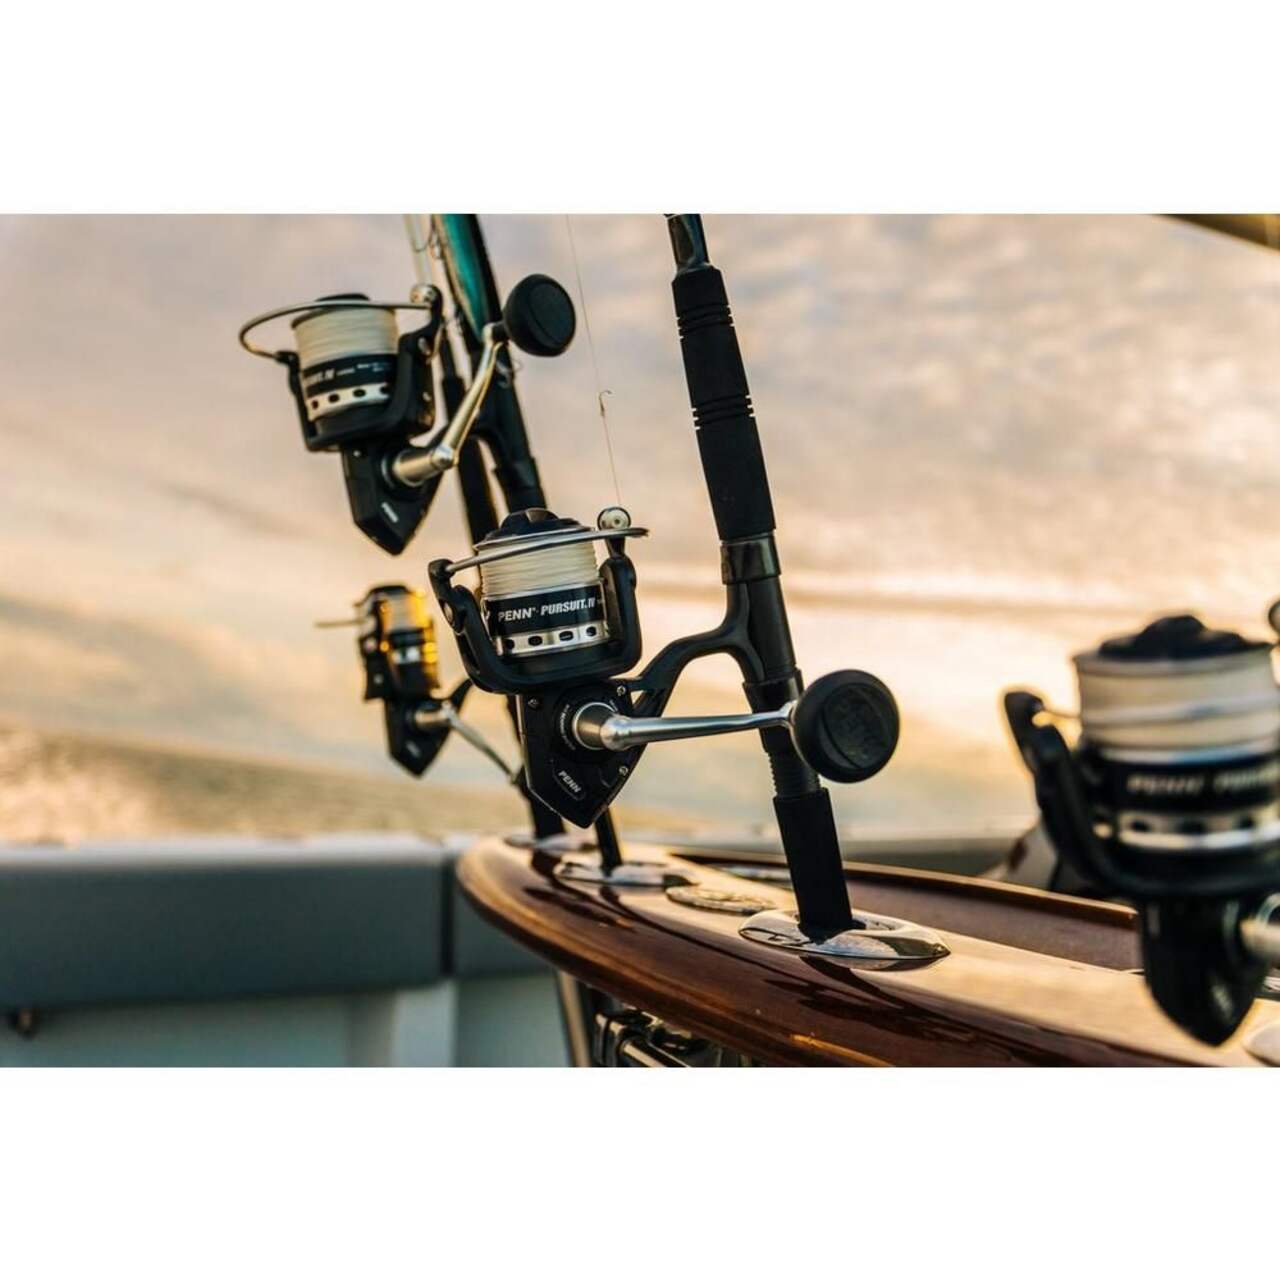 PENN Wrath II Spinning Reel & Combo Now Features the Classic PENN Cosmetics  – Anglers Channel